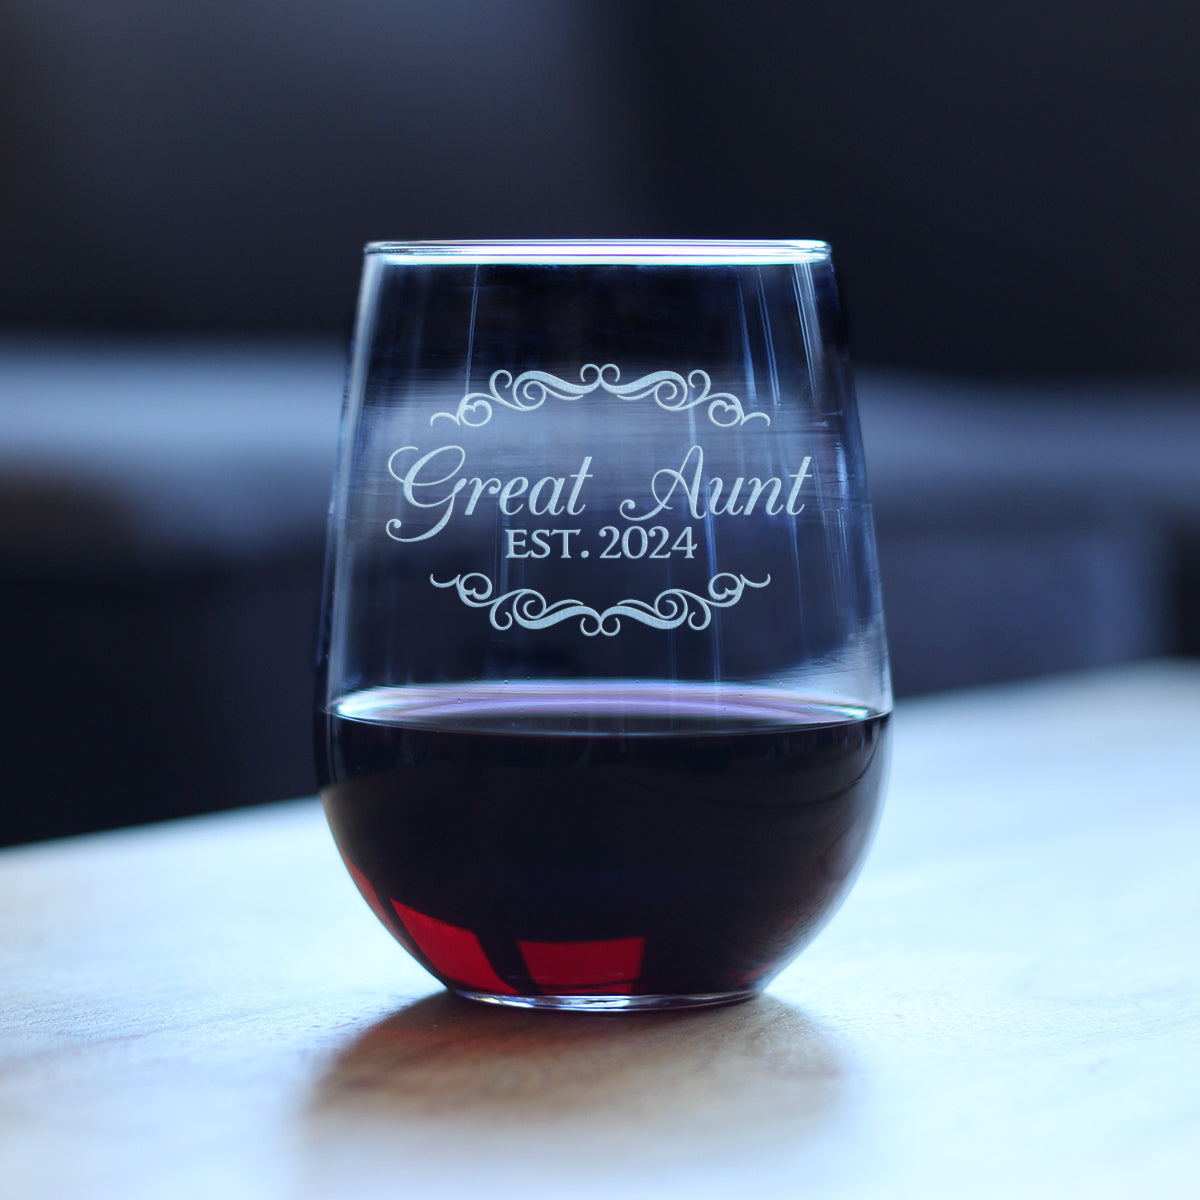 Great Aunt Est 2024 - New Great Aunts Stemless Wine Glass Gift for First Time Great Aunts - Decorative 17 Oz Large Glasses